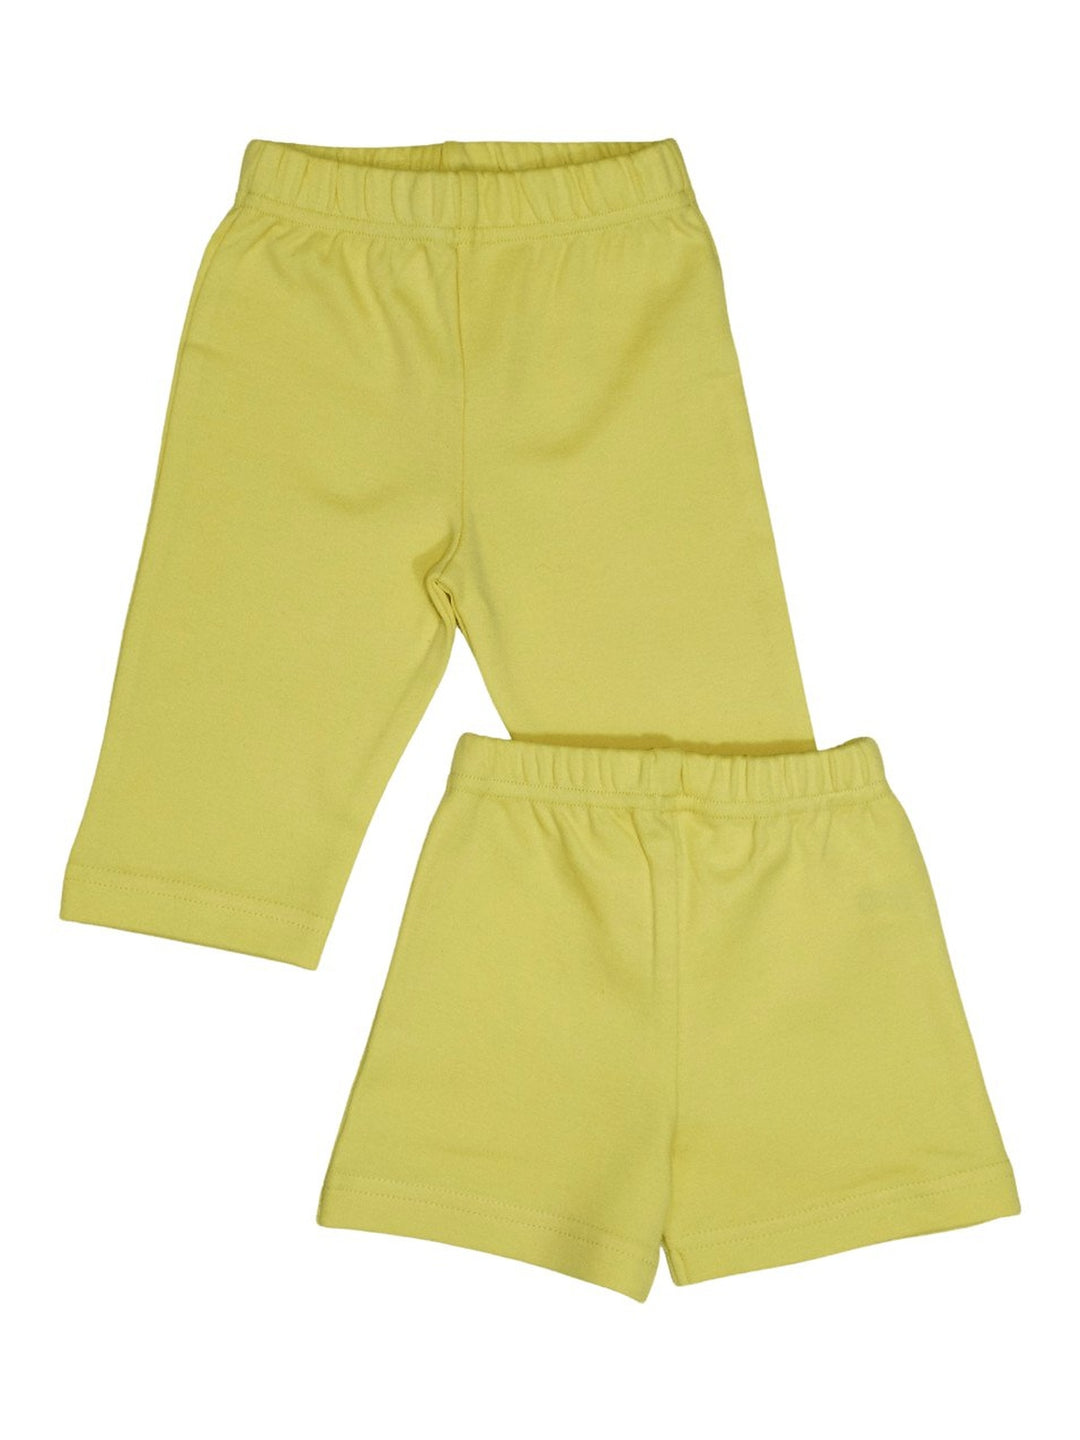 NewbornPull on Pants & Shorts - Available in 4 ColorsPassion Lilie